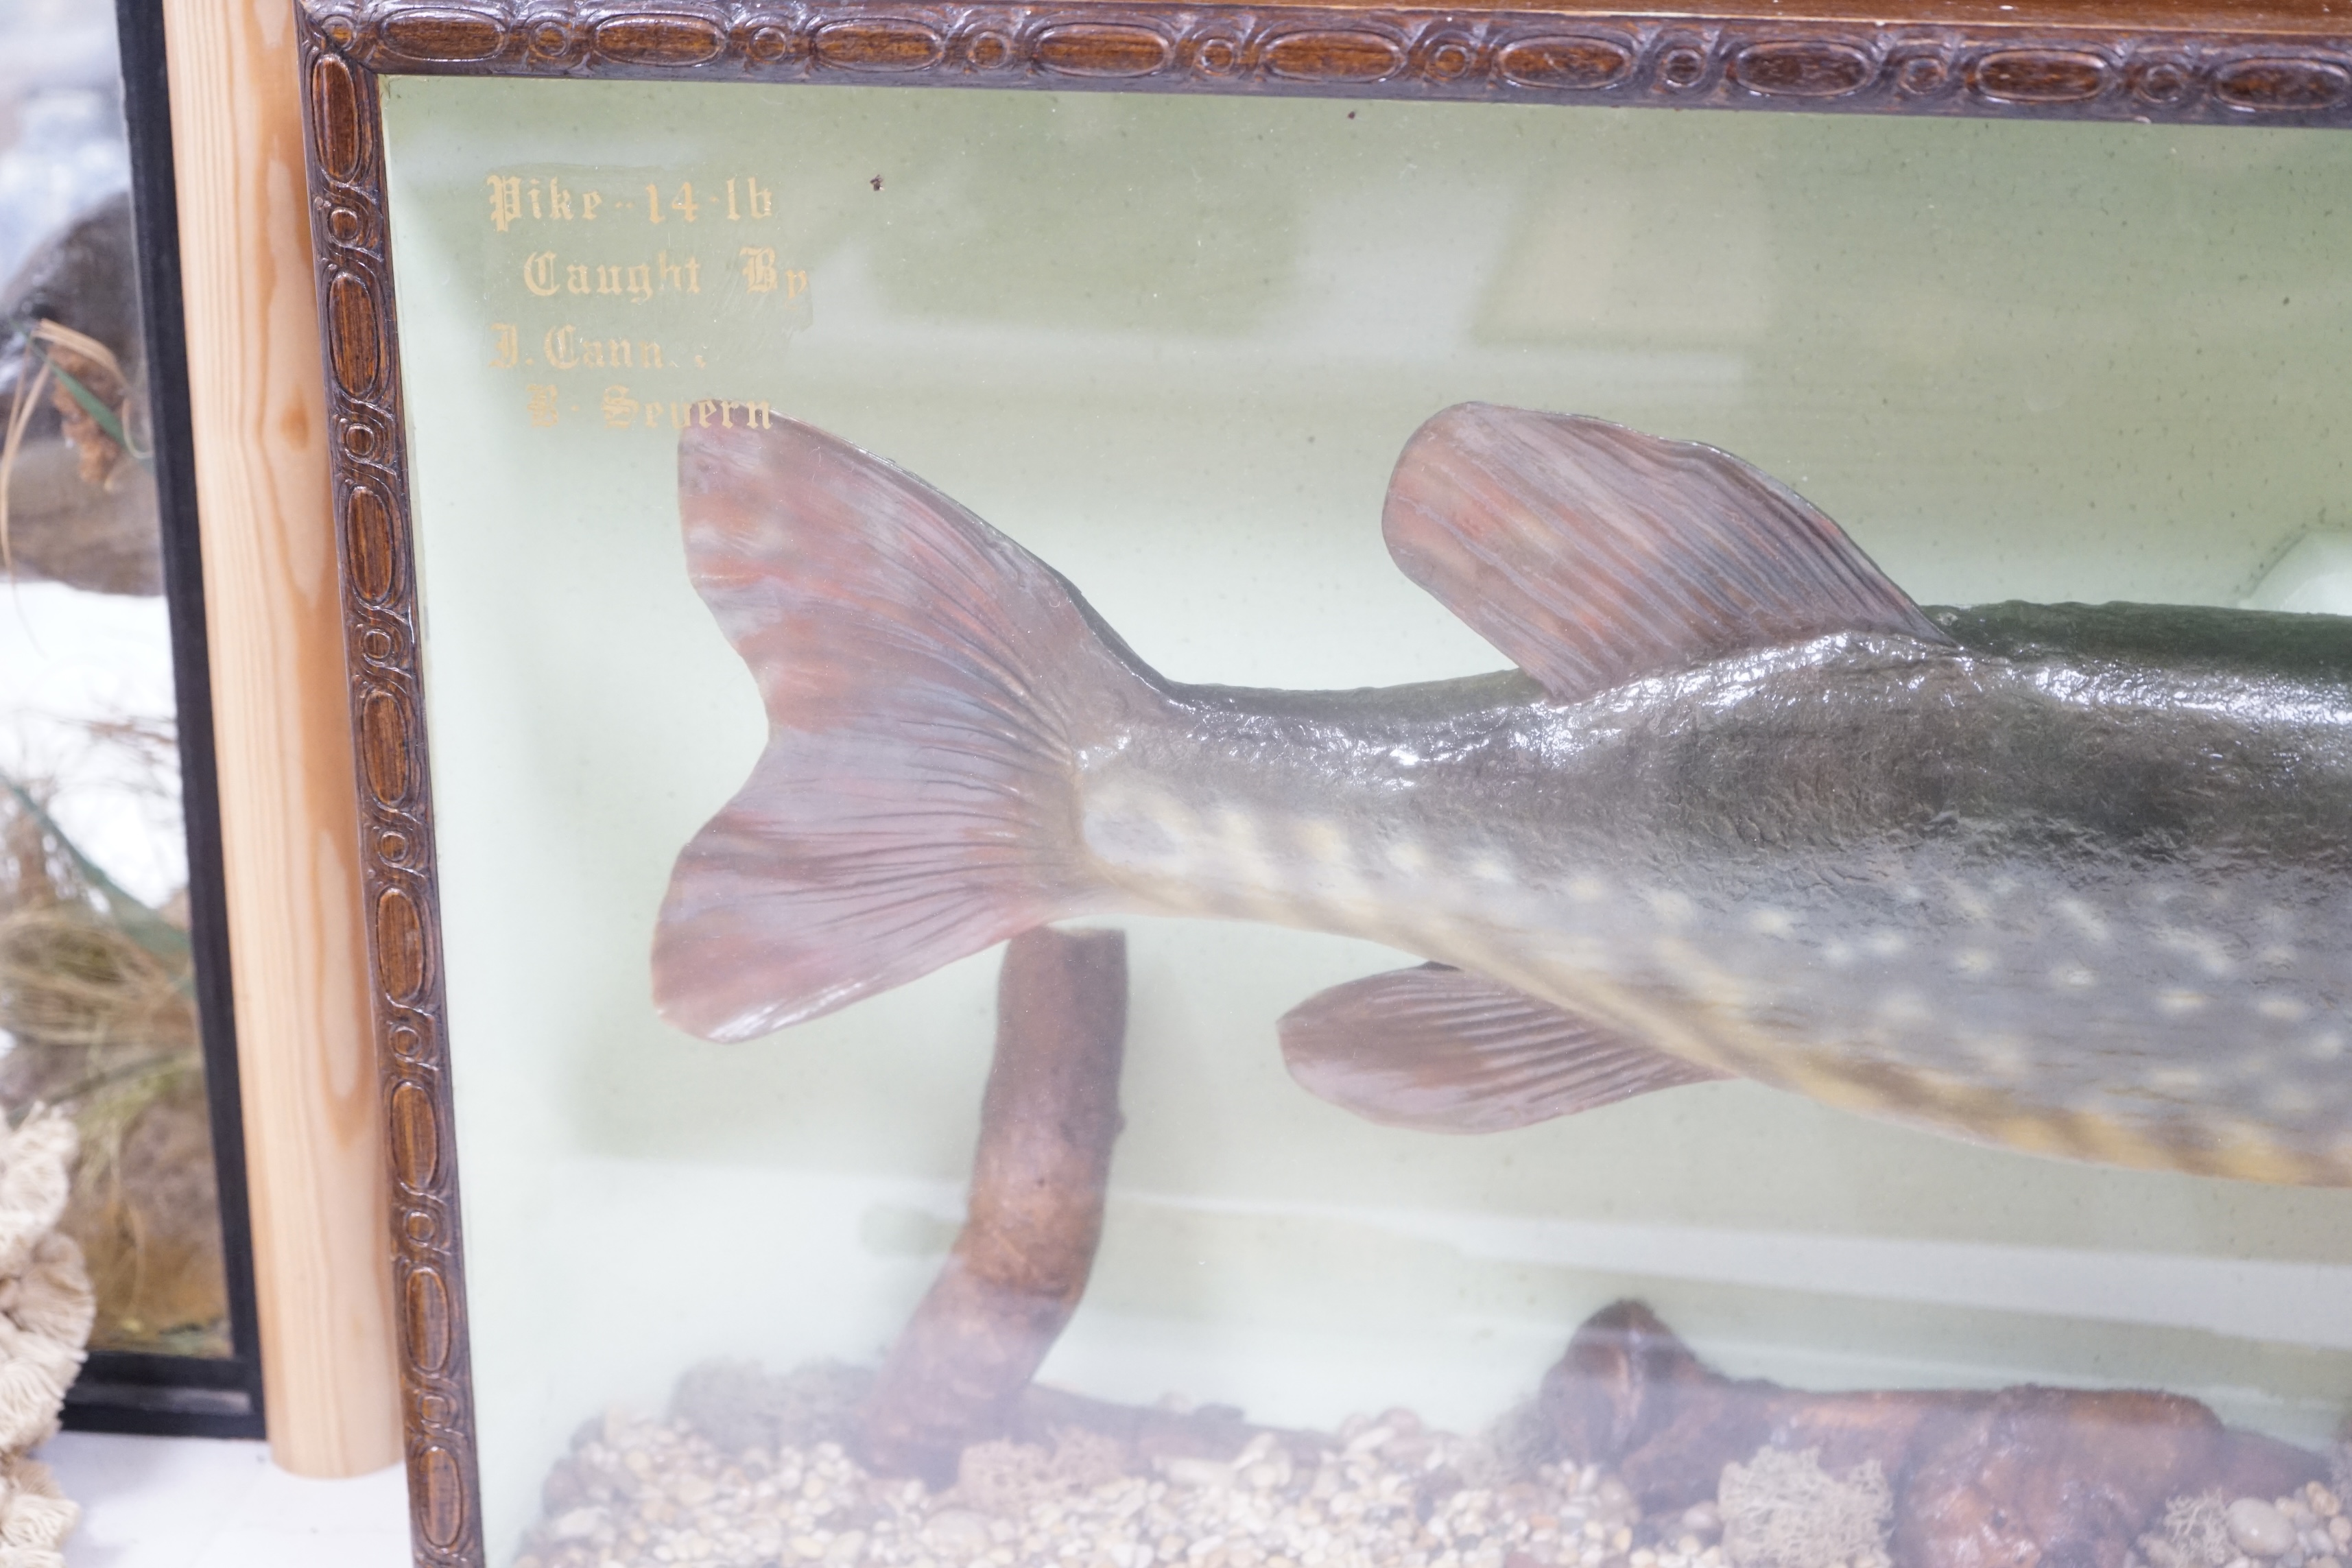 A cased taxidermy pike, 14lb caught by J Canner R Severn, case 41 x 103cm. Condition - good